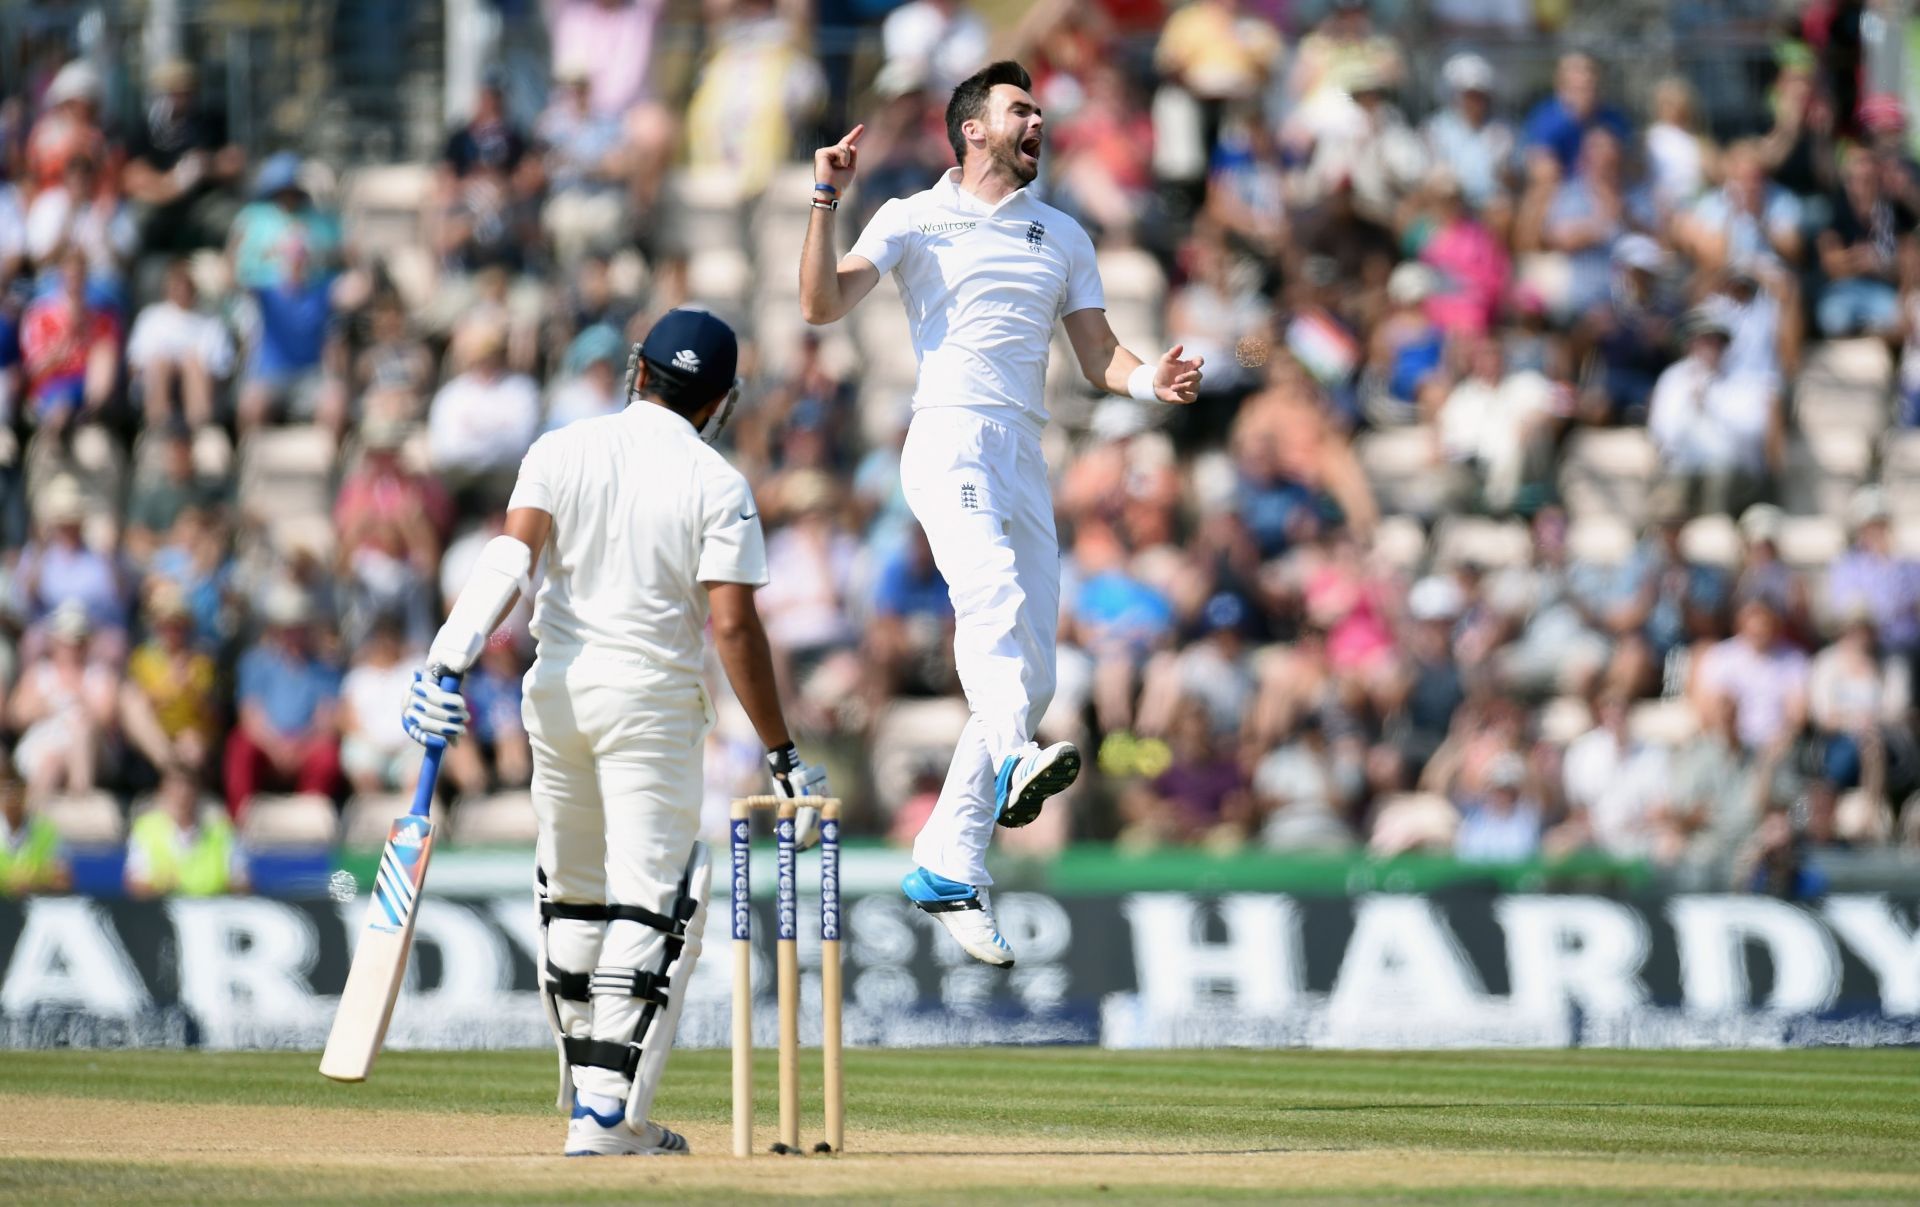 Anderson will be back in the English whites for the second Test at Vizag.